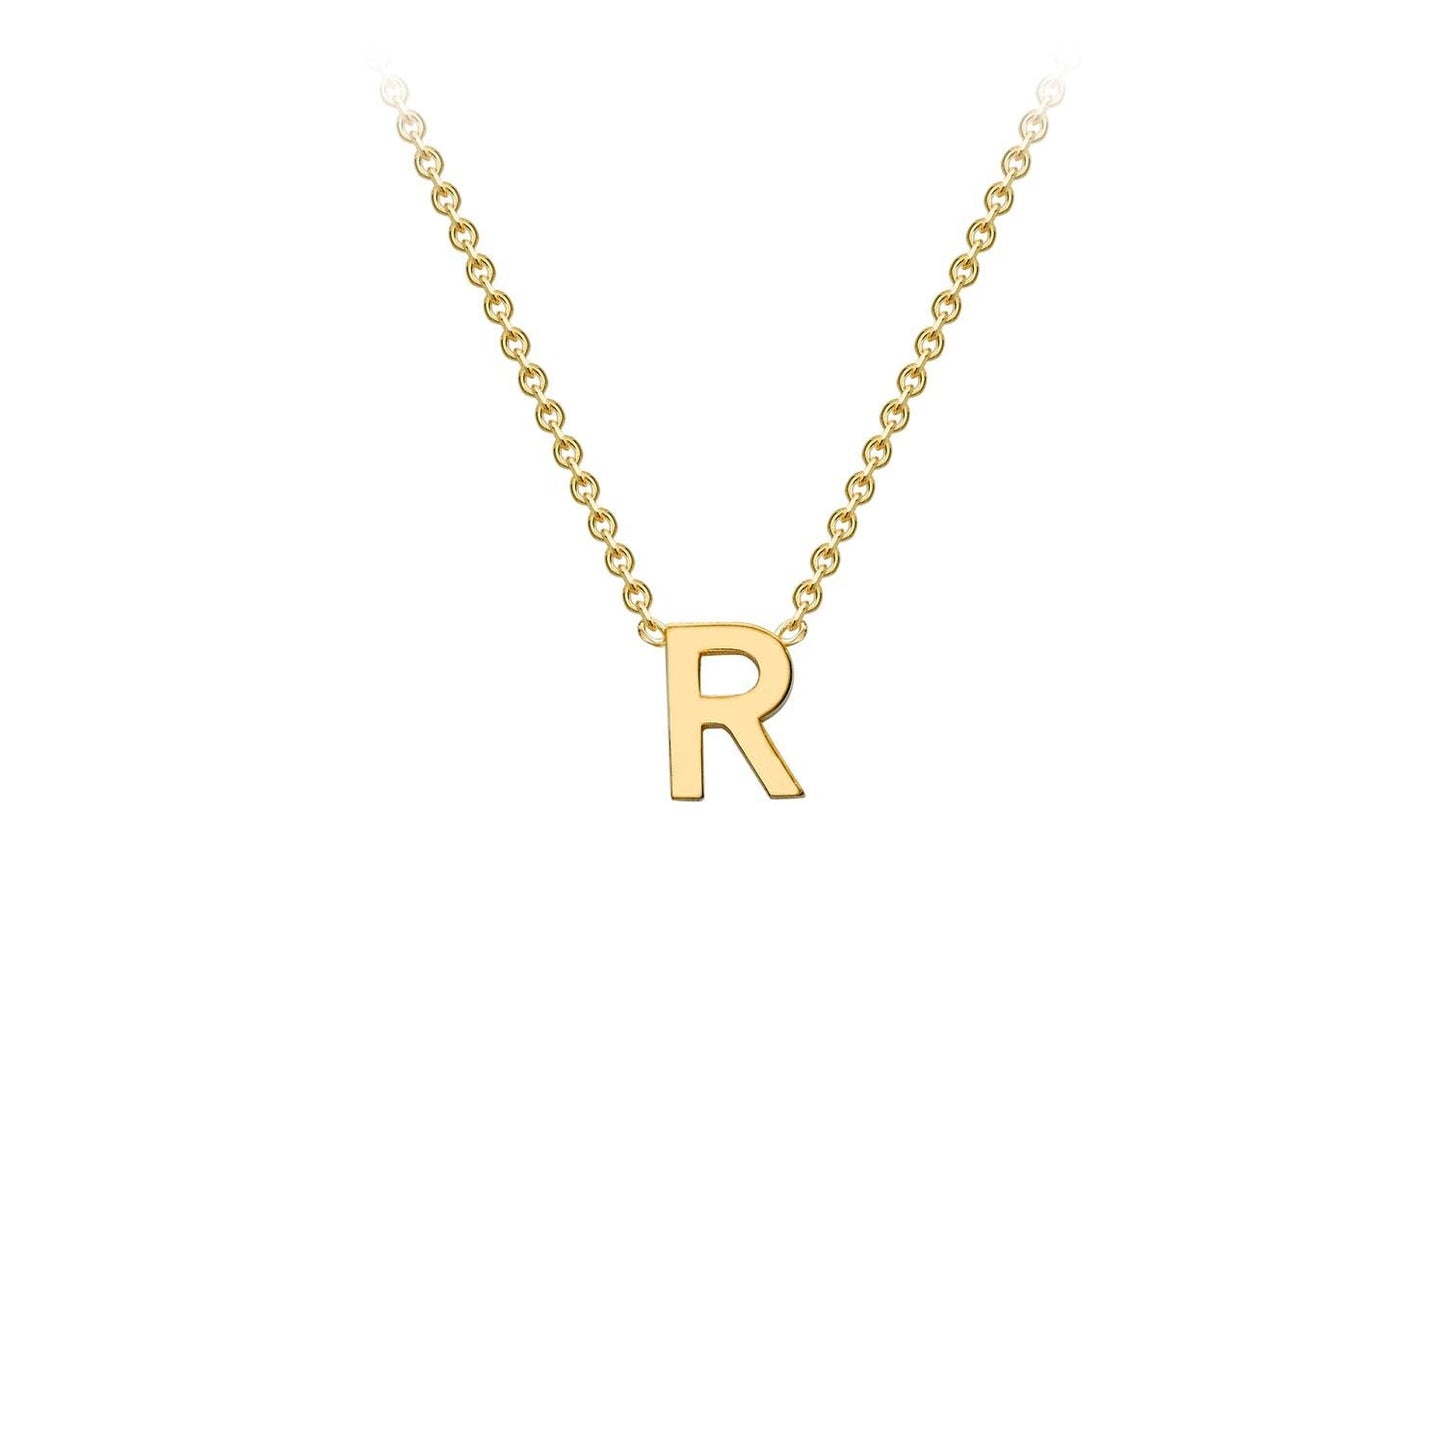 9K Yellow Gold 'R' Initial Adjustable Letter Necklace 38/43cm